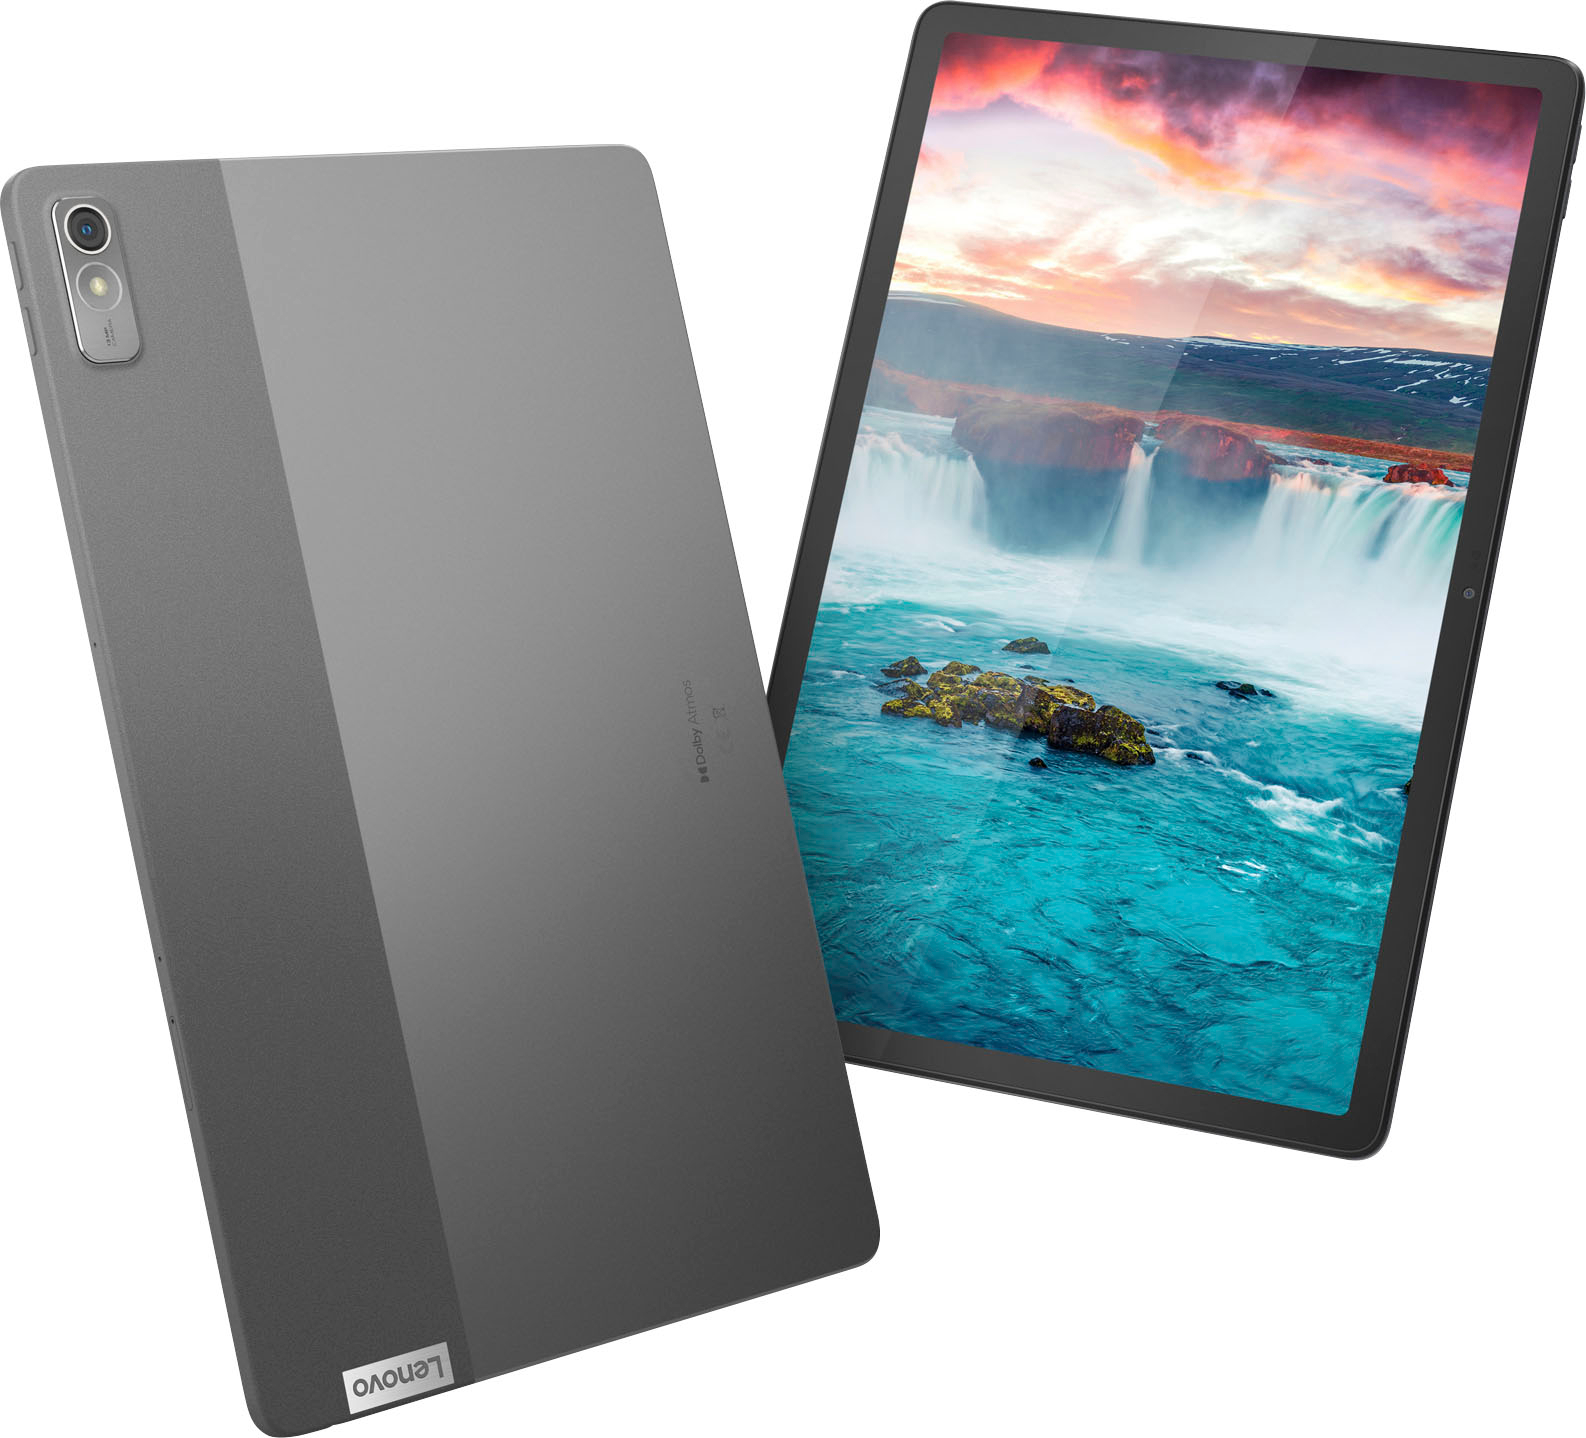 Lenovo Tab P11 Gen 2, Fast & powerful 11.5″ Android Tablet